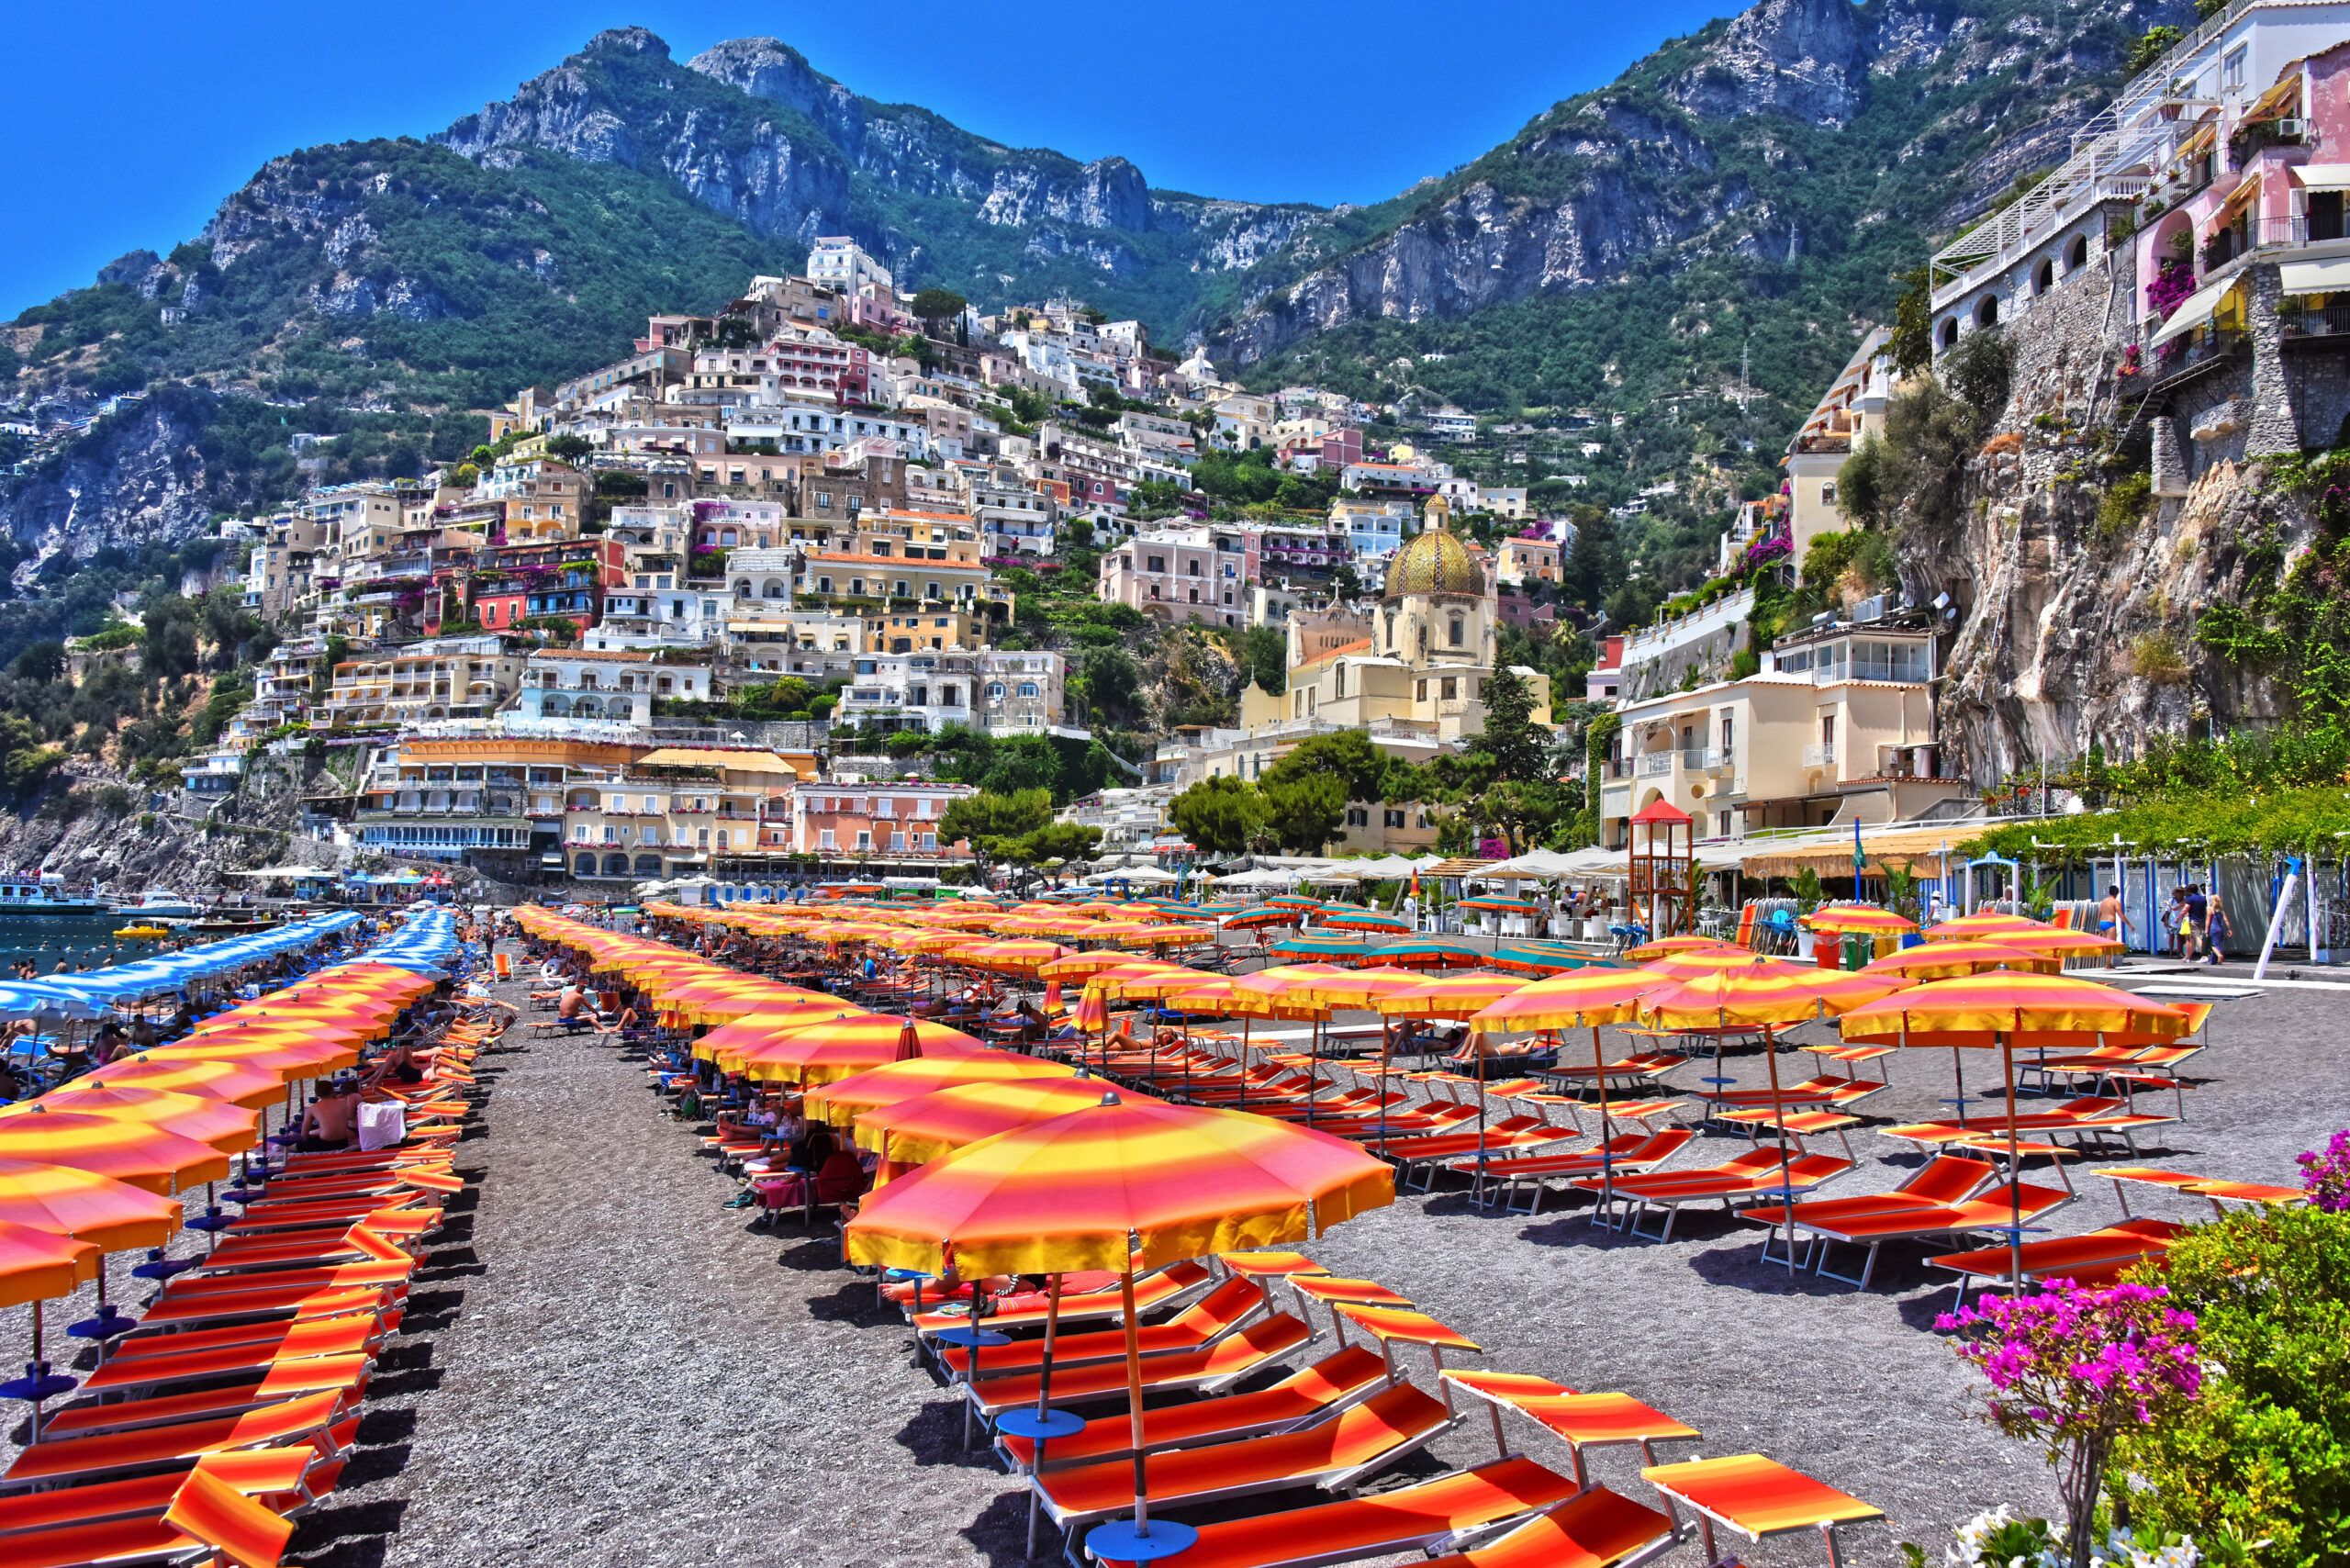 Colorful beach umbrellas and lounges line the beach, with the buildings of Positano, Italy rising up on a distant hill.